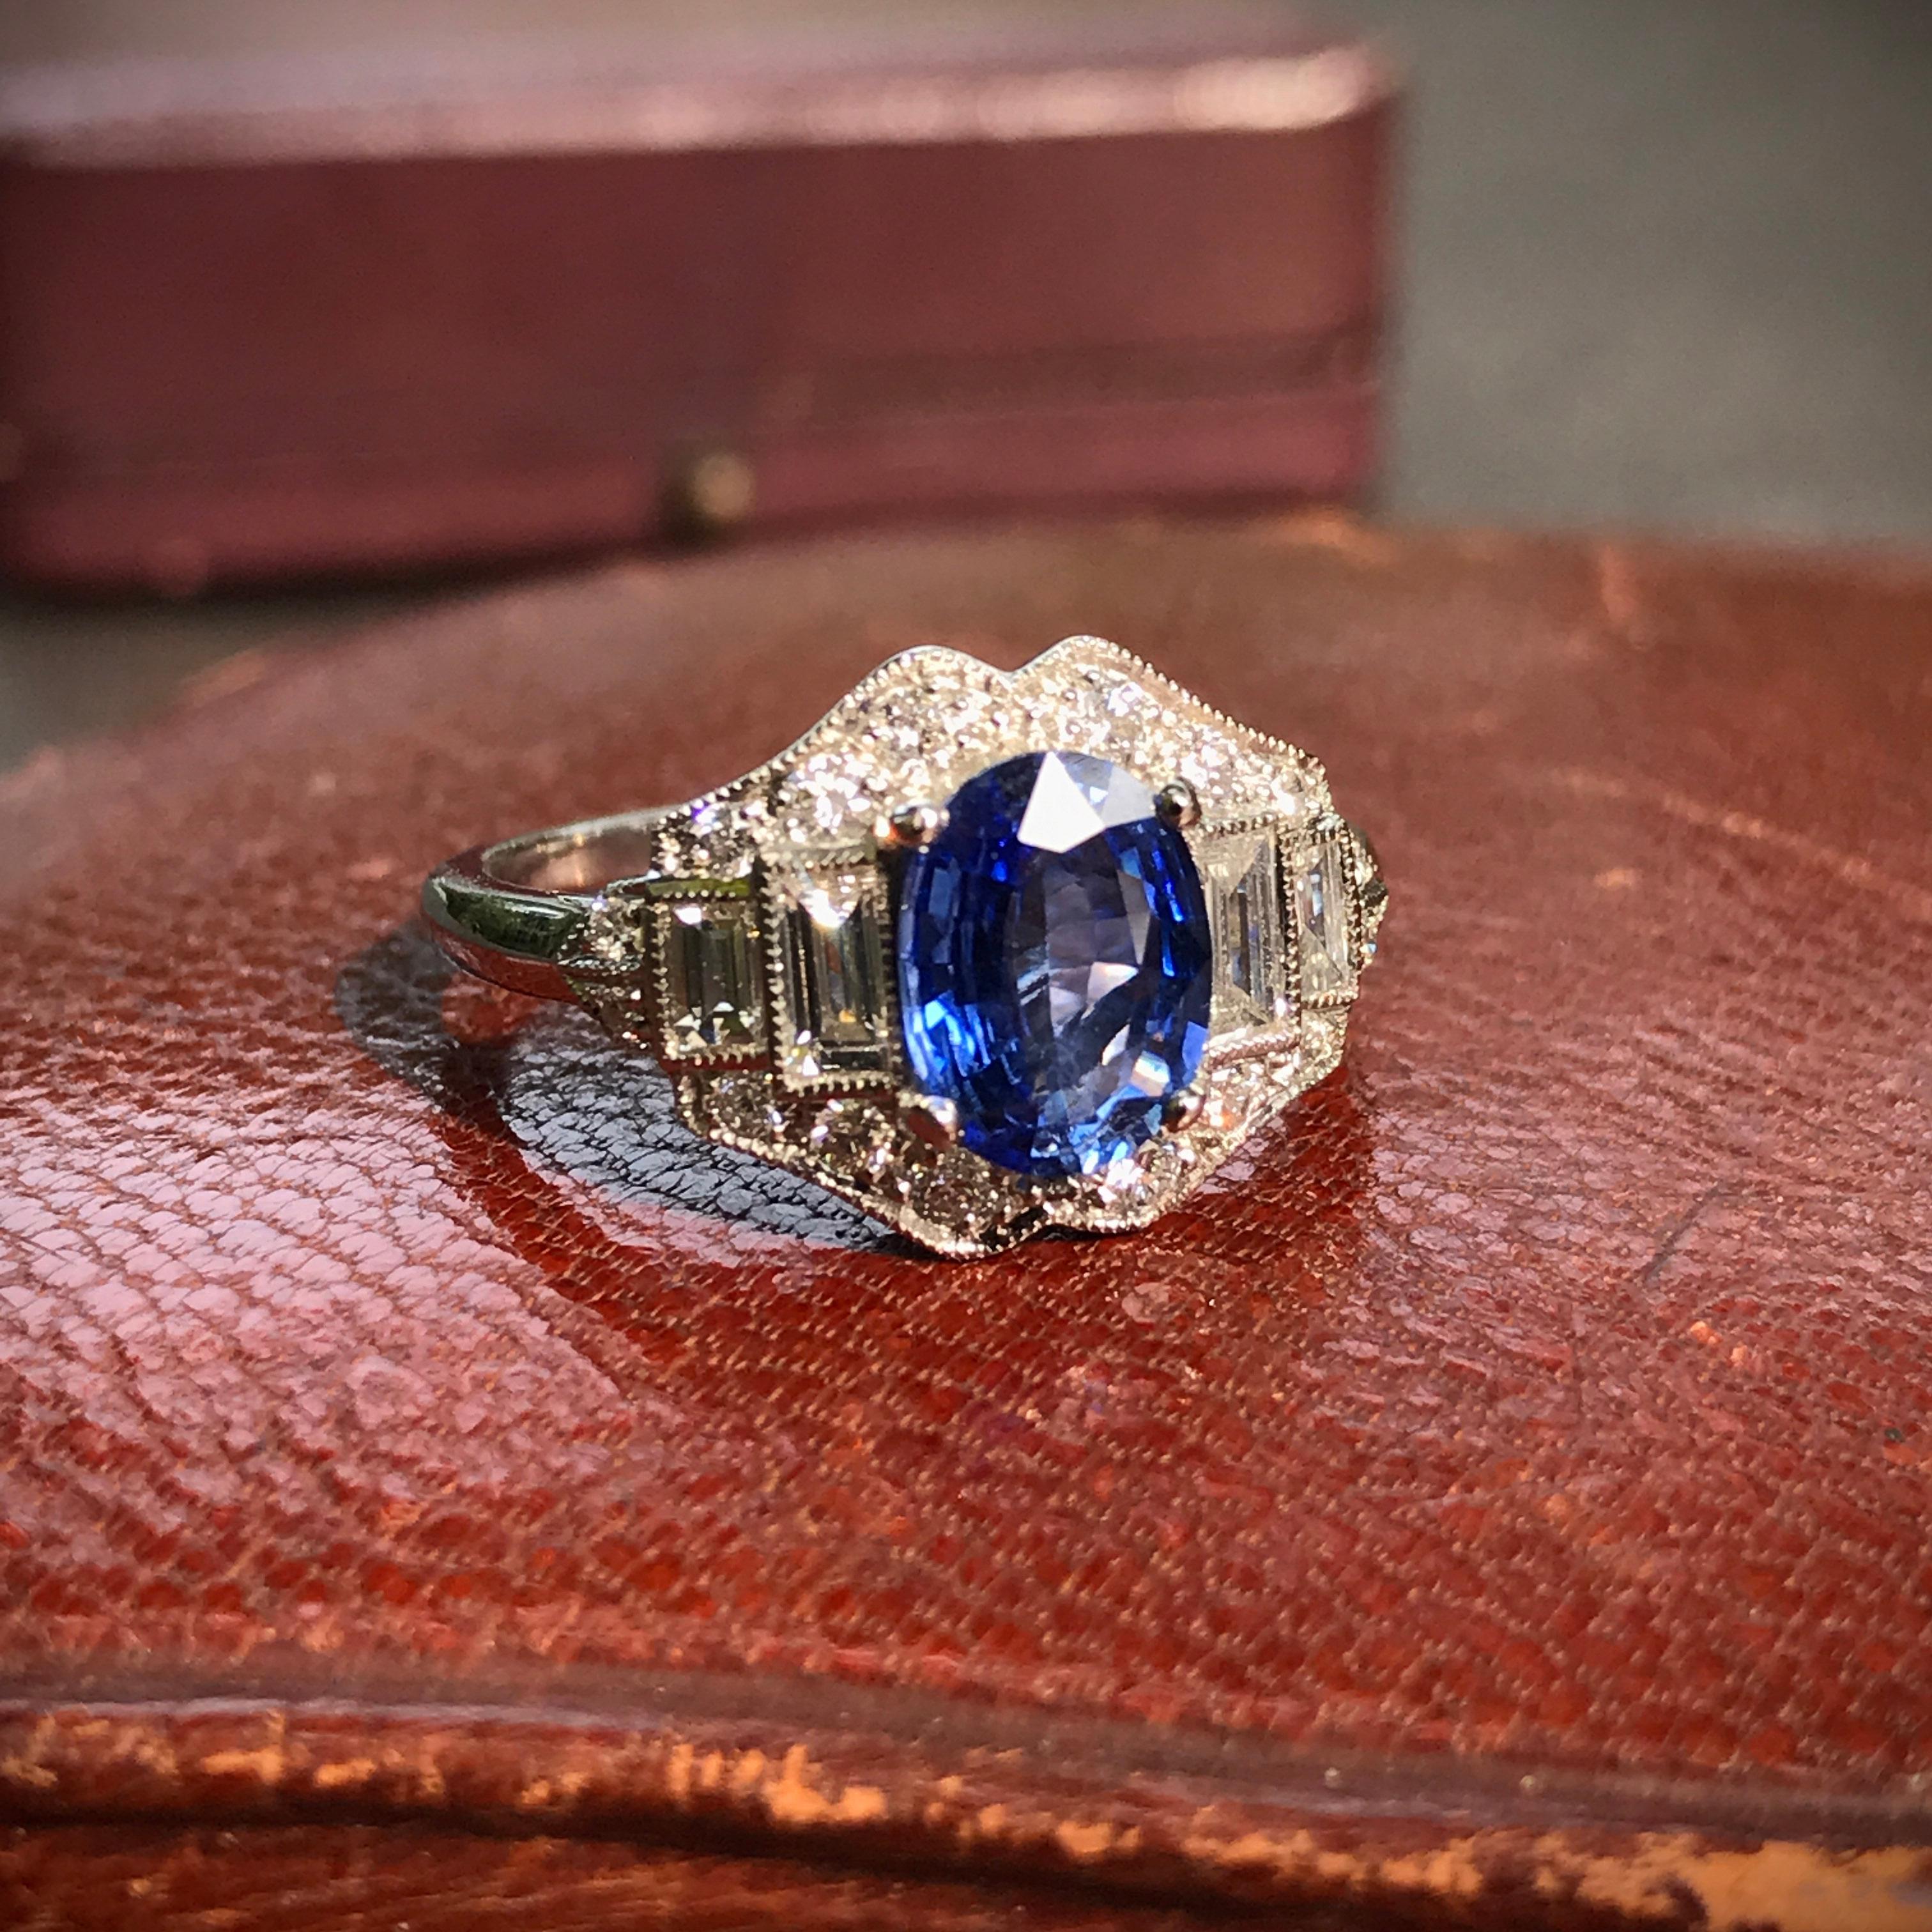 Oval Cut Ceylon Sapphire and Diamond Art Deco Style Engagement Ring in 18k White Gold